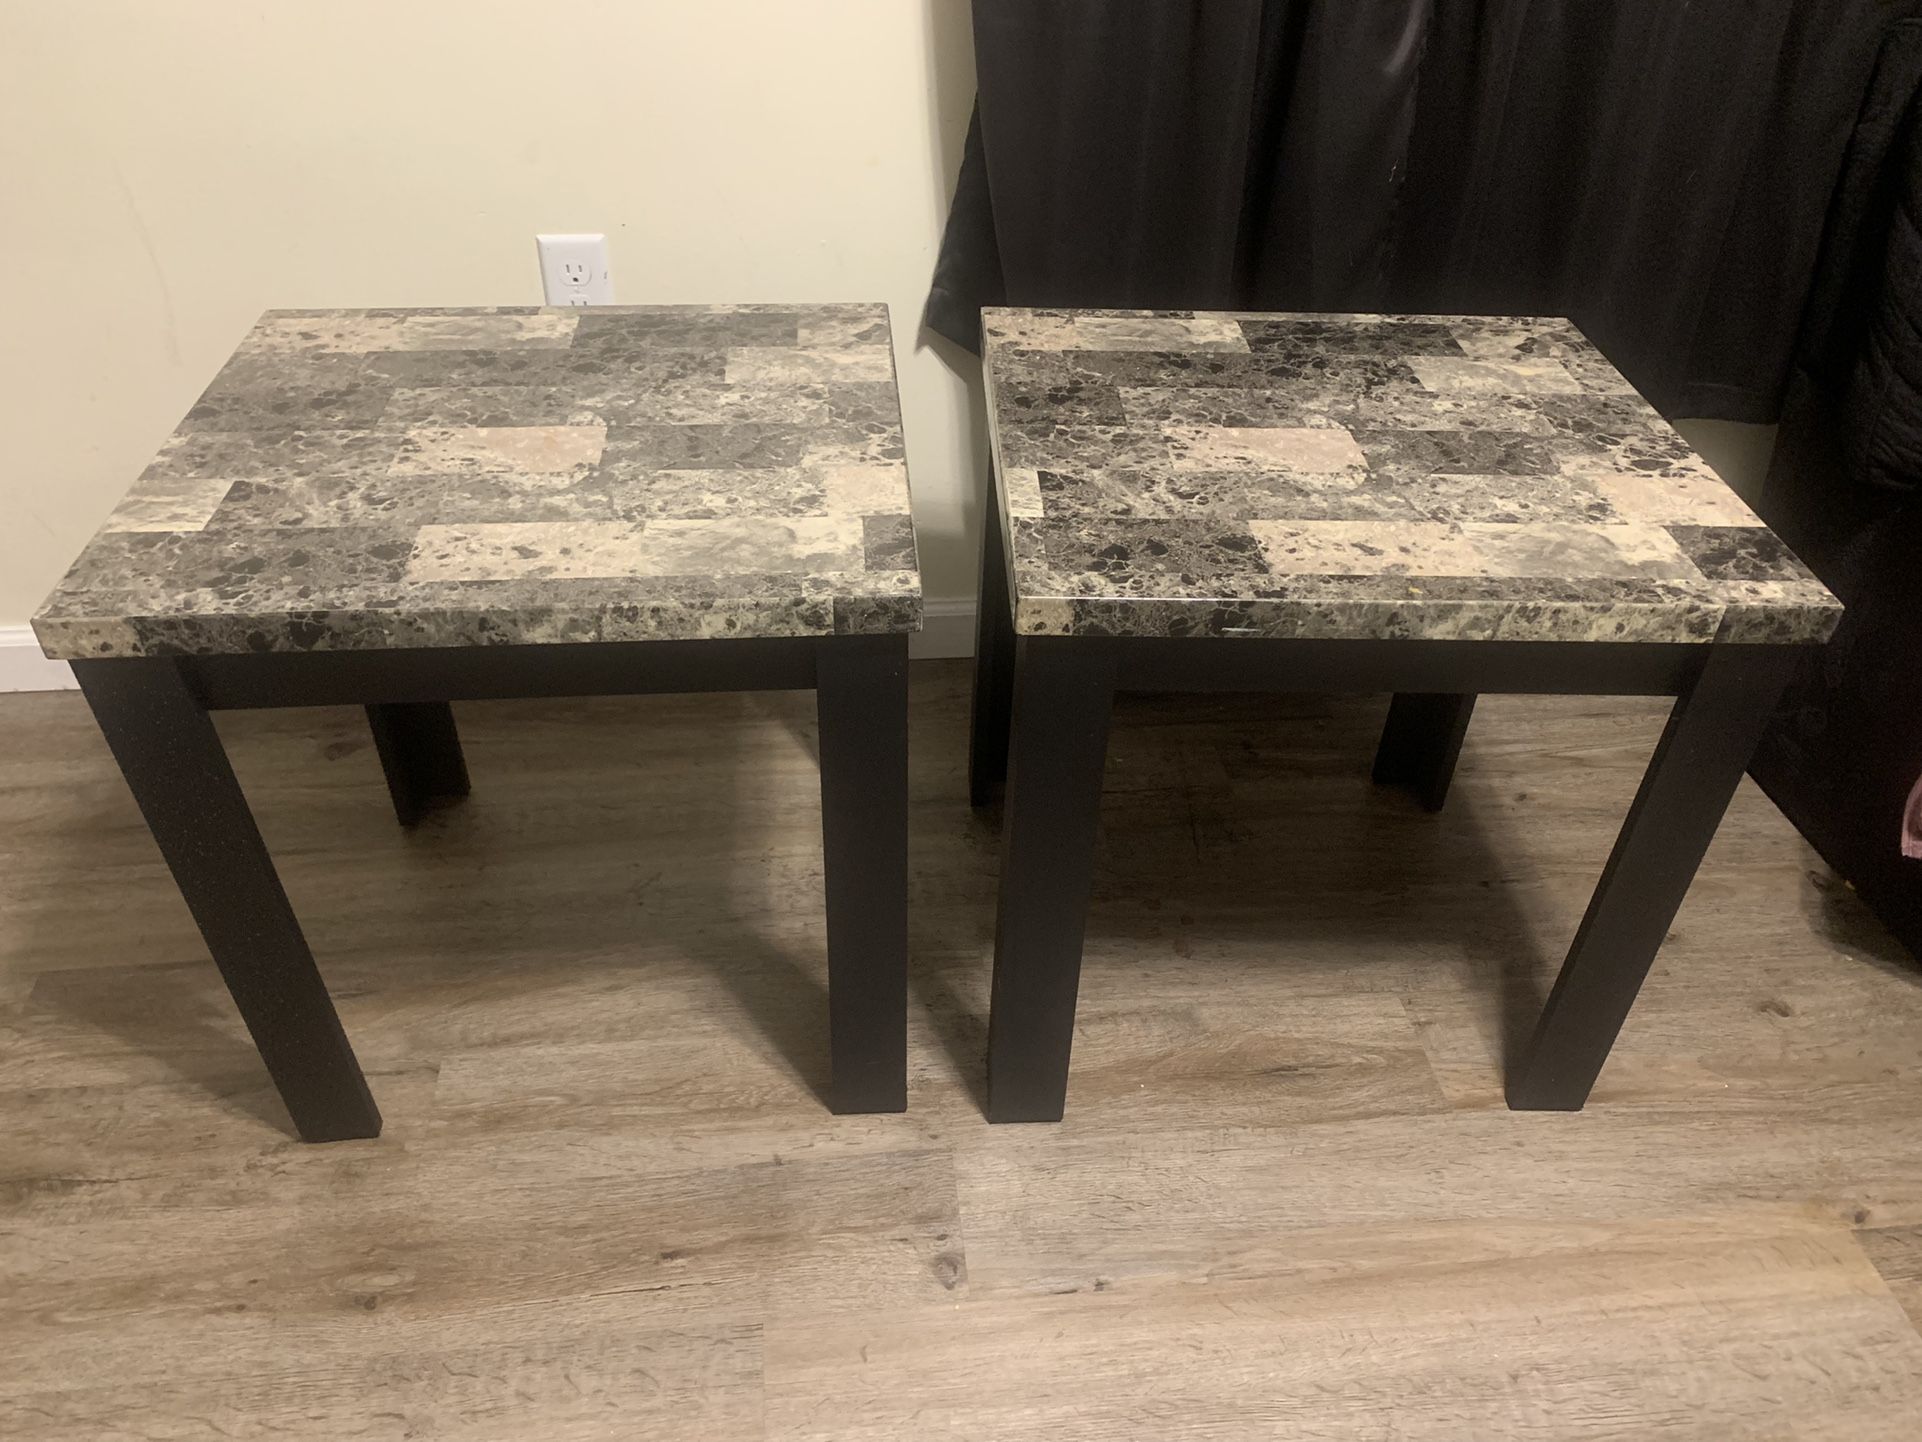 2 Living Room End Tables